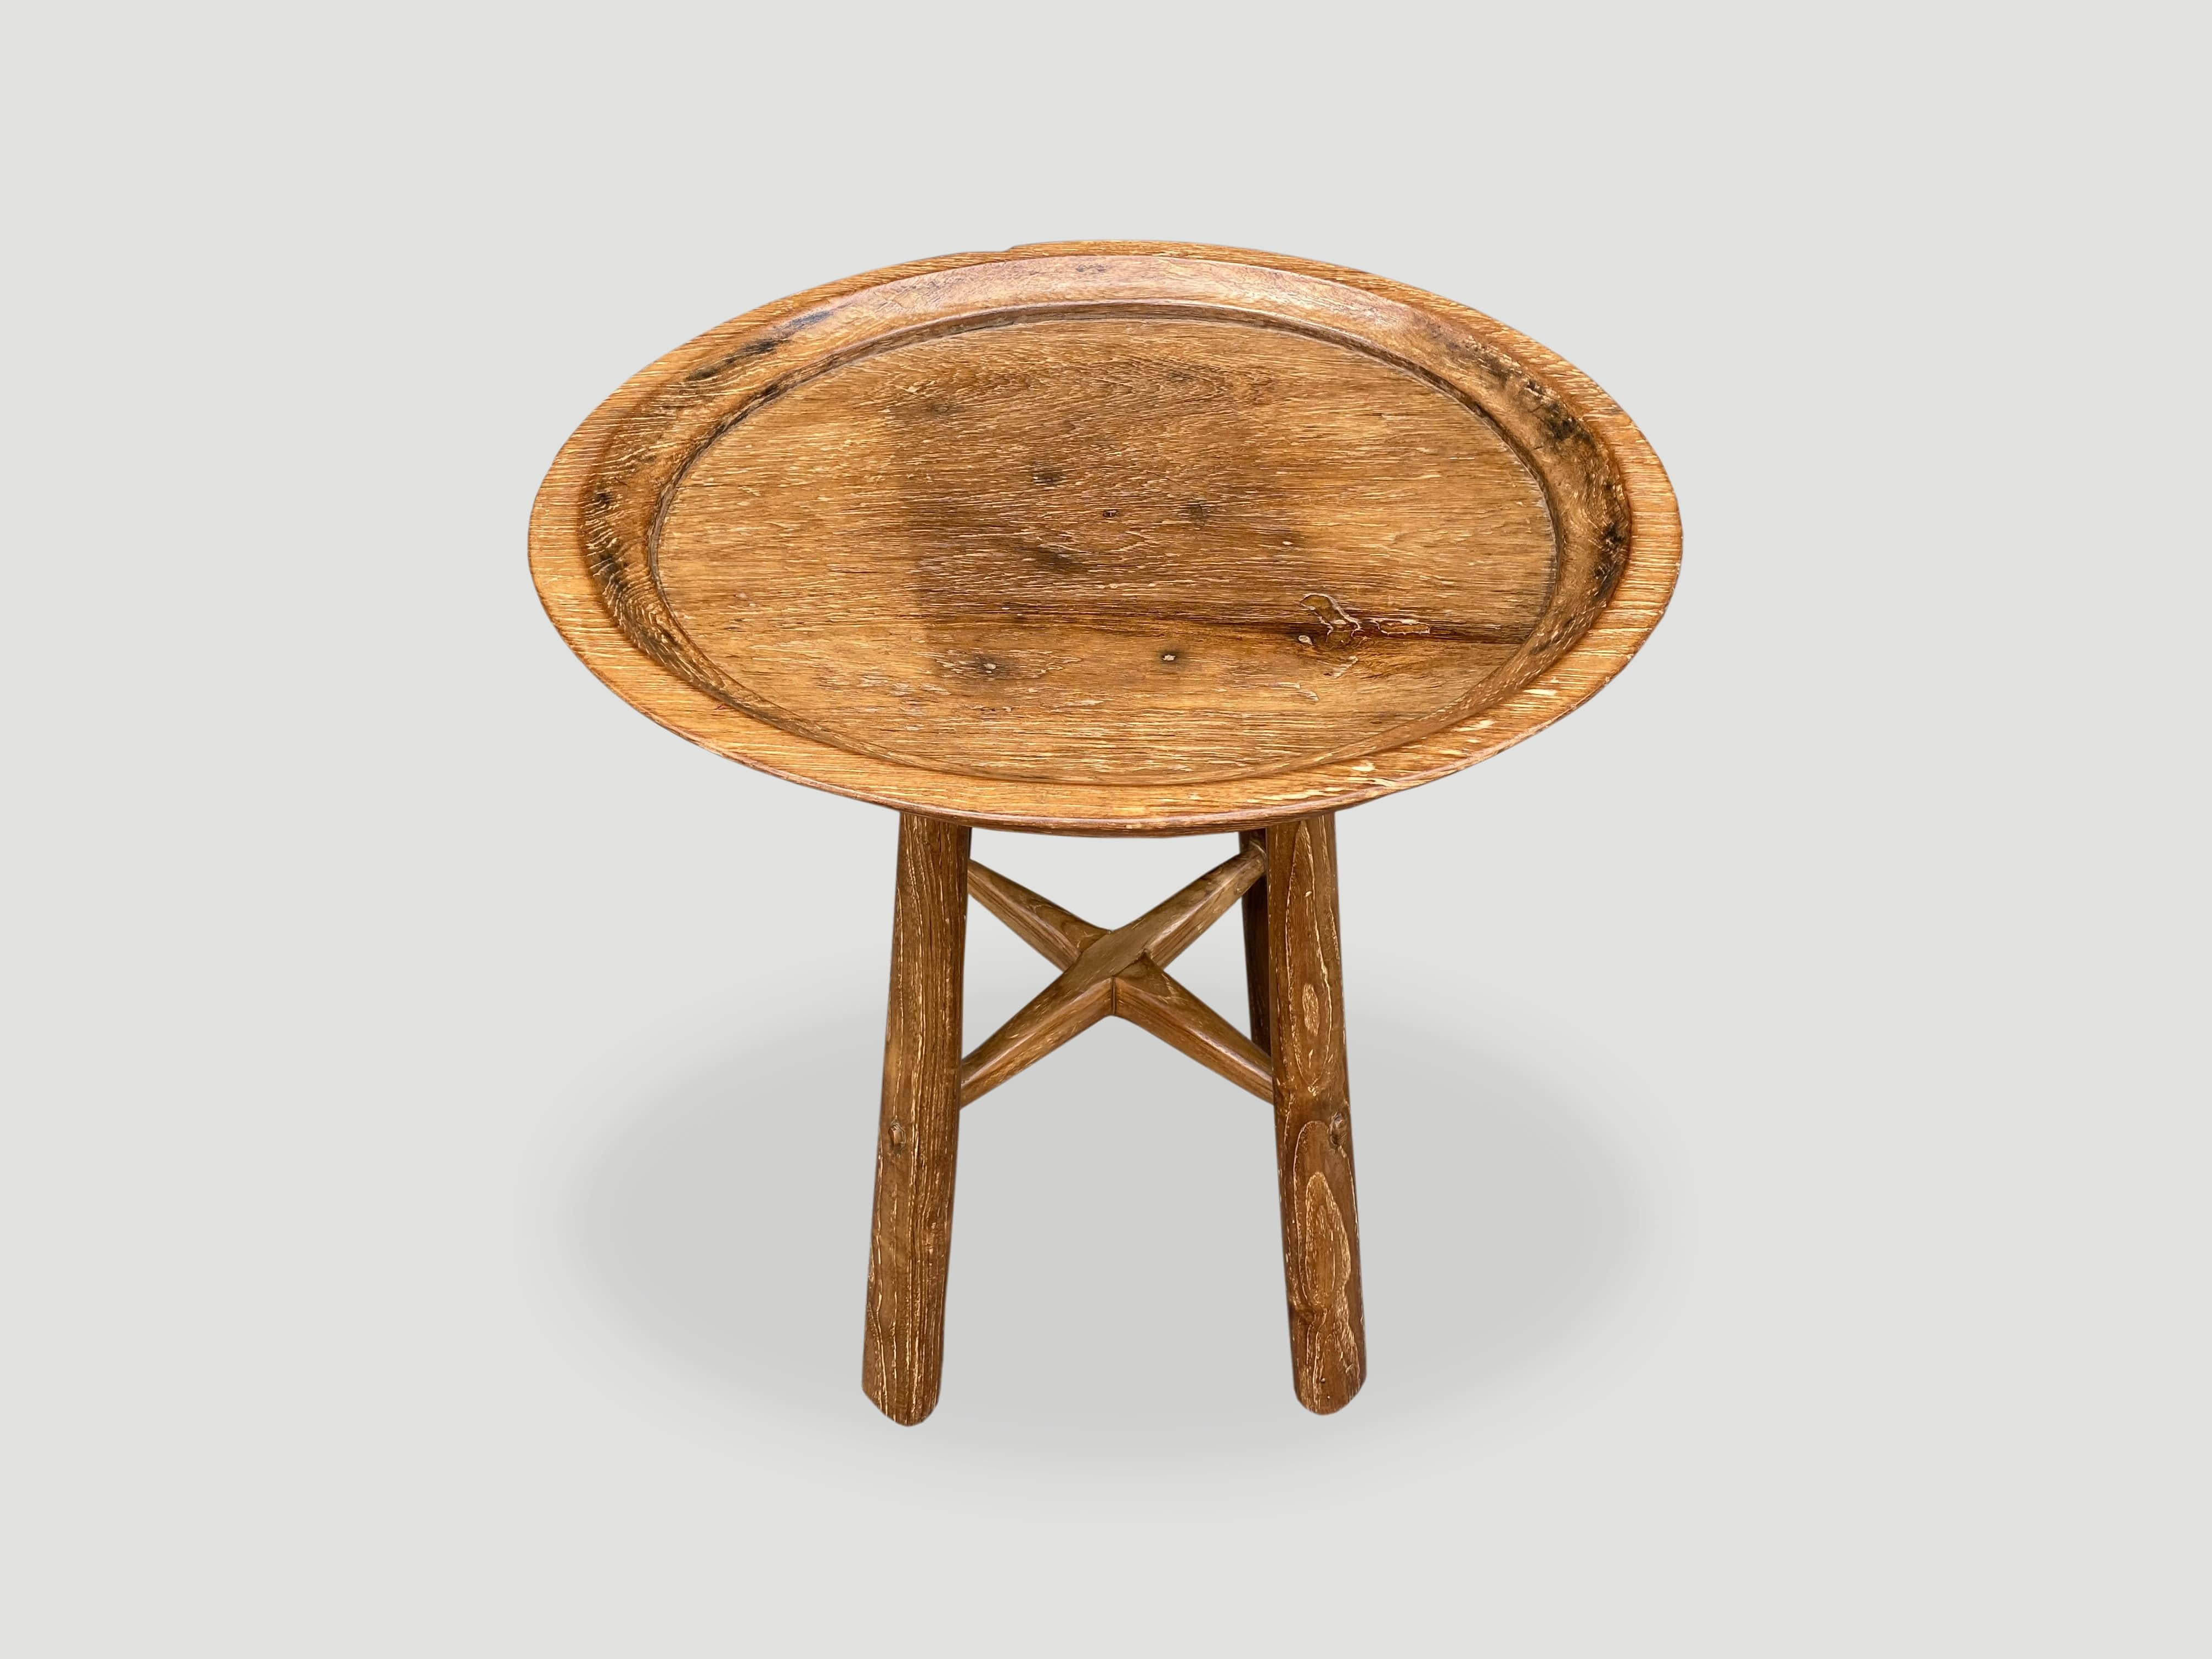 Introducing the midcentury Couture collection new to 2021. Taken from my finest collection, a beautiful antique wabi sabi wood tray. We added midcentury style rounded teak legs for a beautiful tray side table.

Own an Andrianna Shamaris